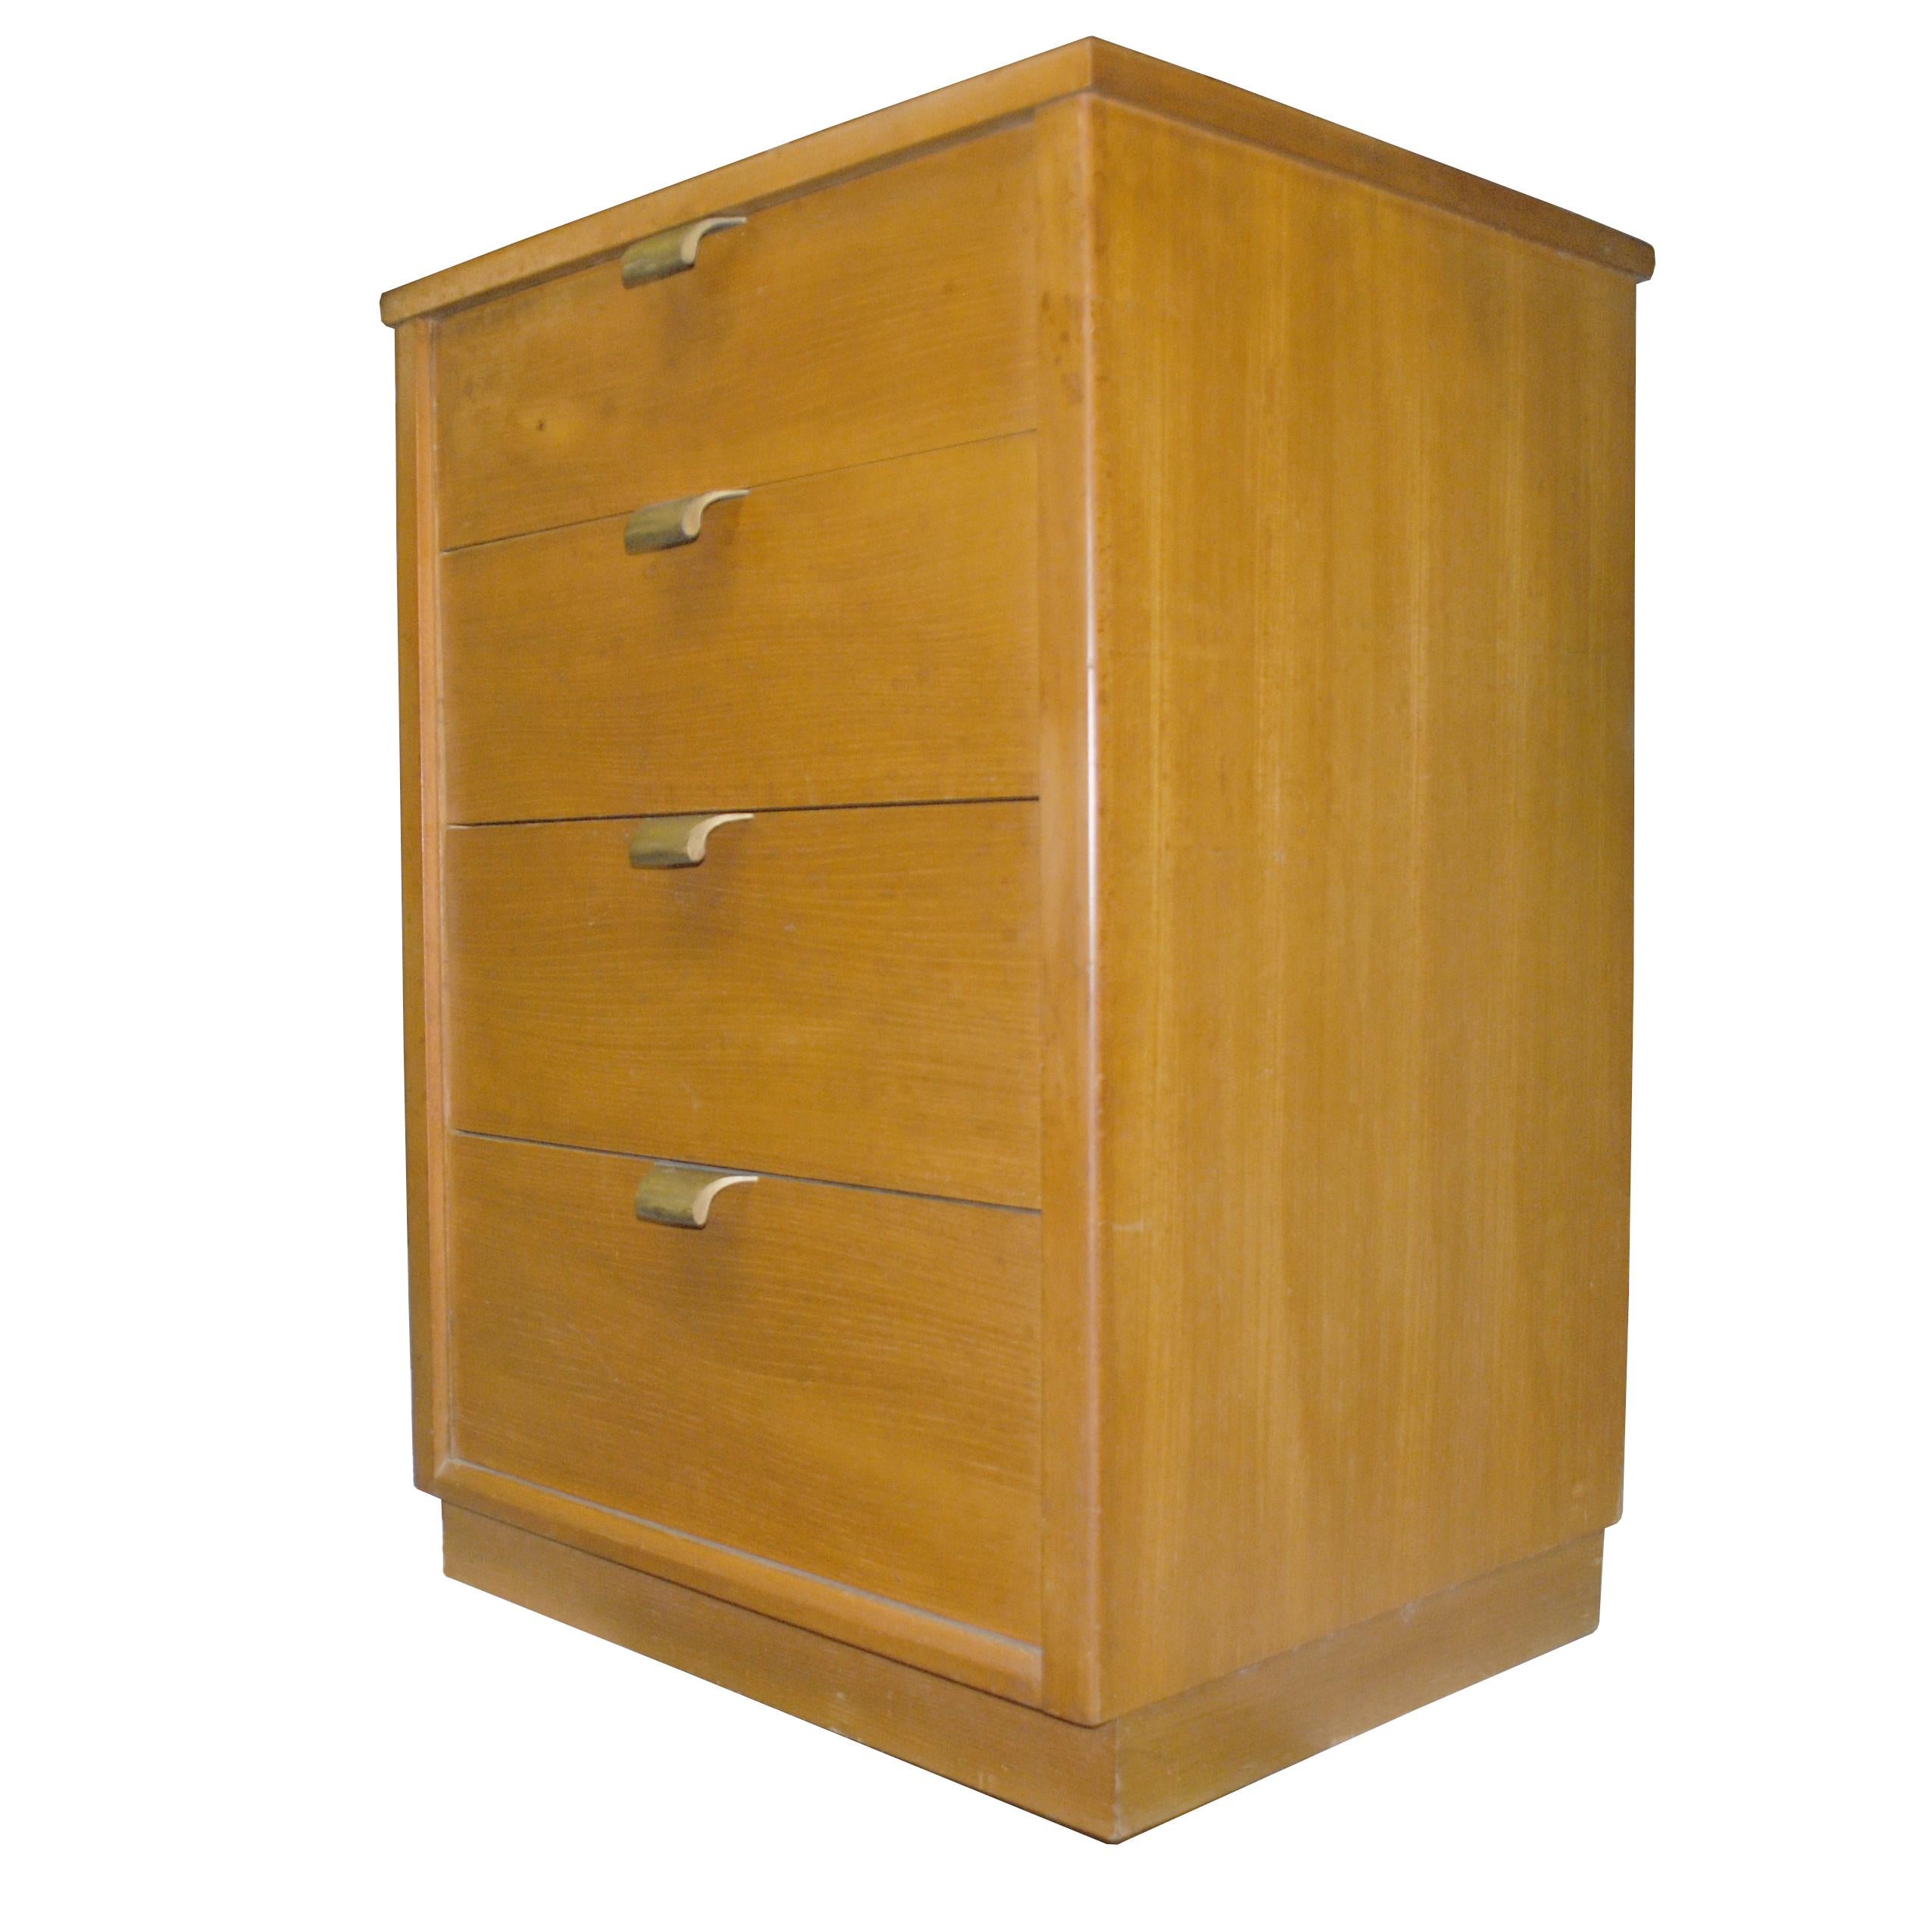 Precedent four drawer nightstand.  Beautiful in design and material, the Precedent series was designed by Edward Wormley in 1947. 

Nightstand features wood construction, four pull-out drawers and bronze drawer pulls.
We have 1 Wormley dresser